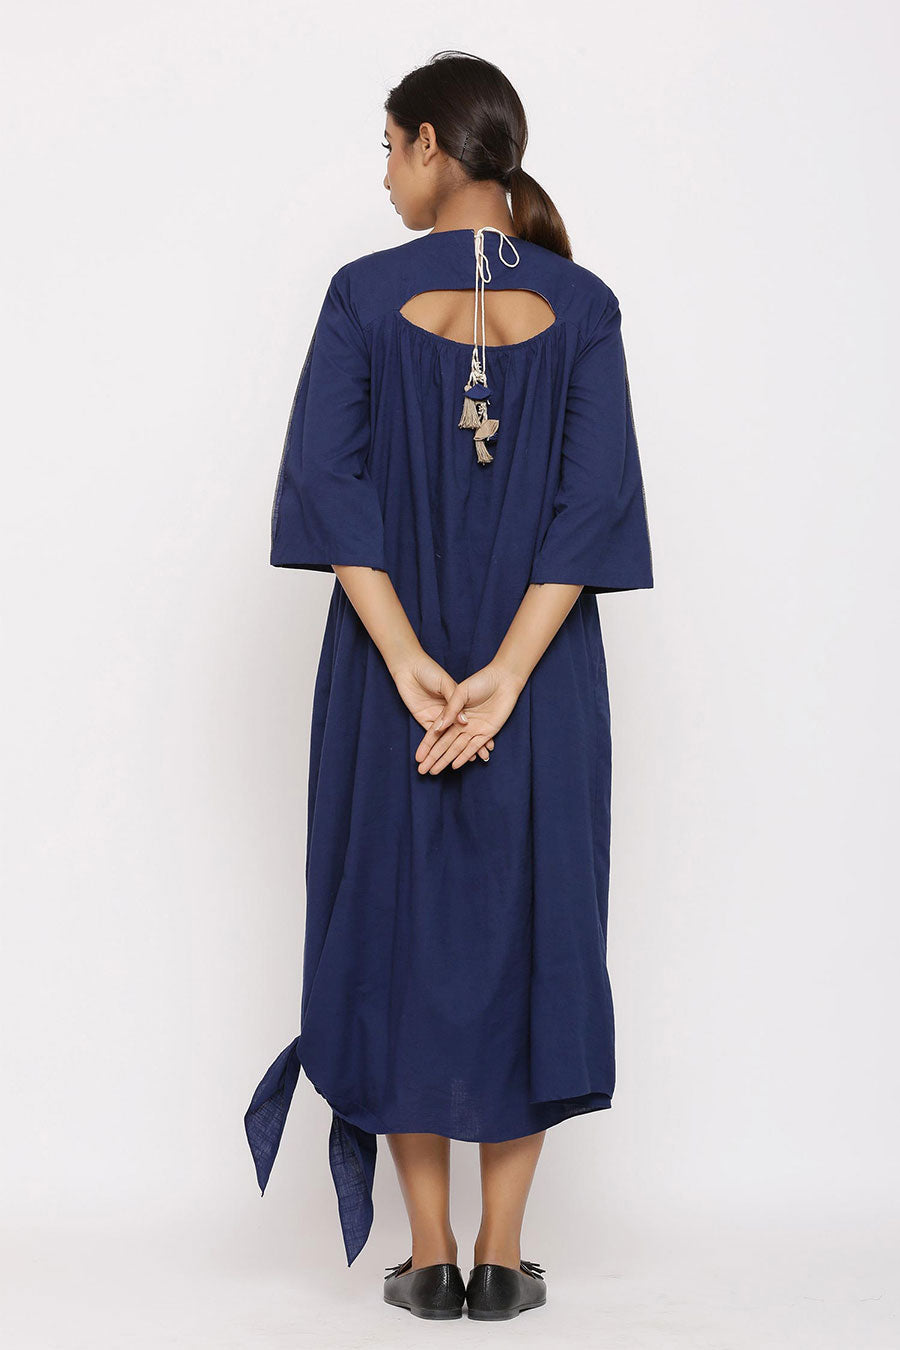 Baro Navy Blue Embroidered Dress